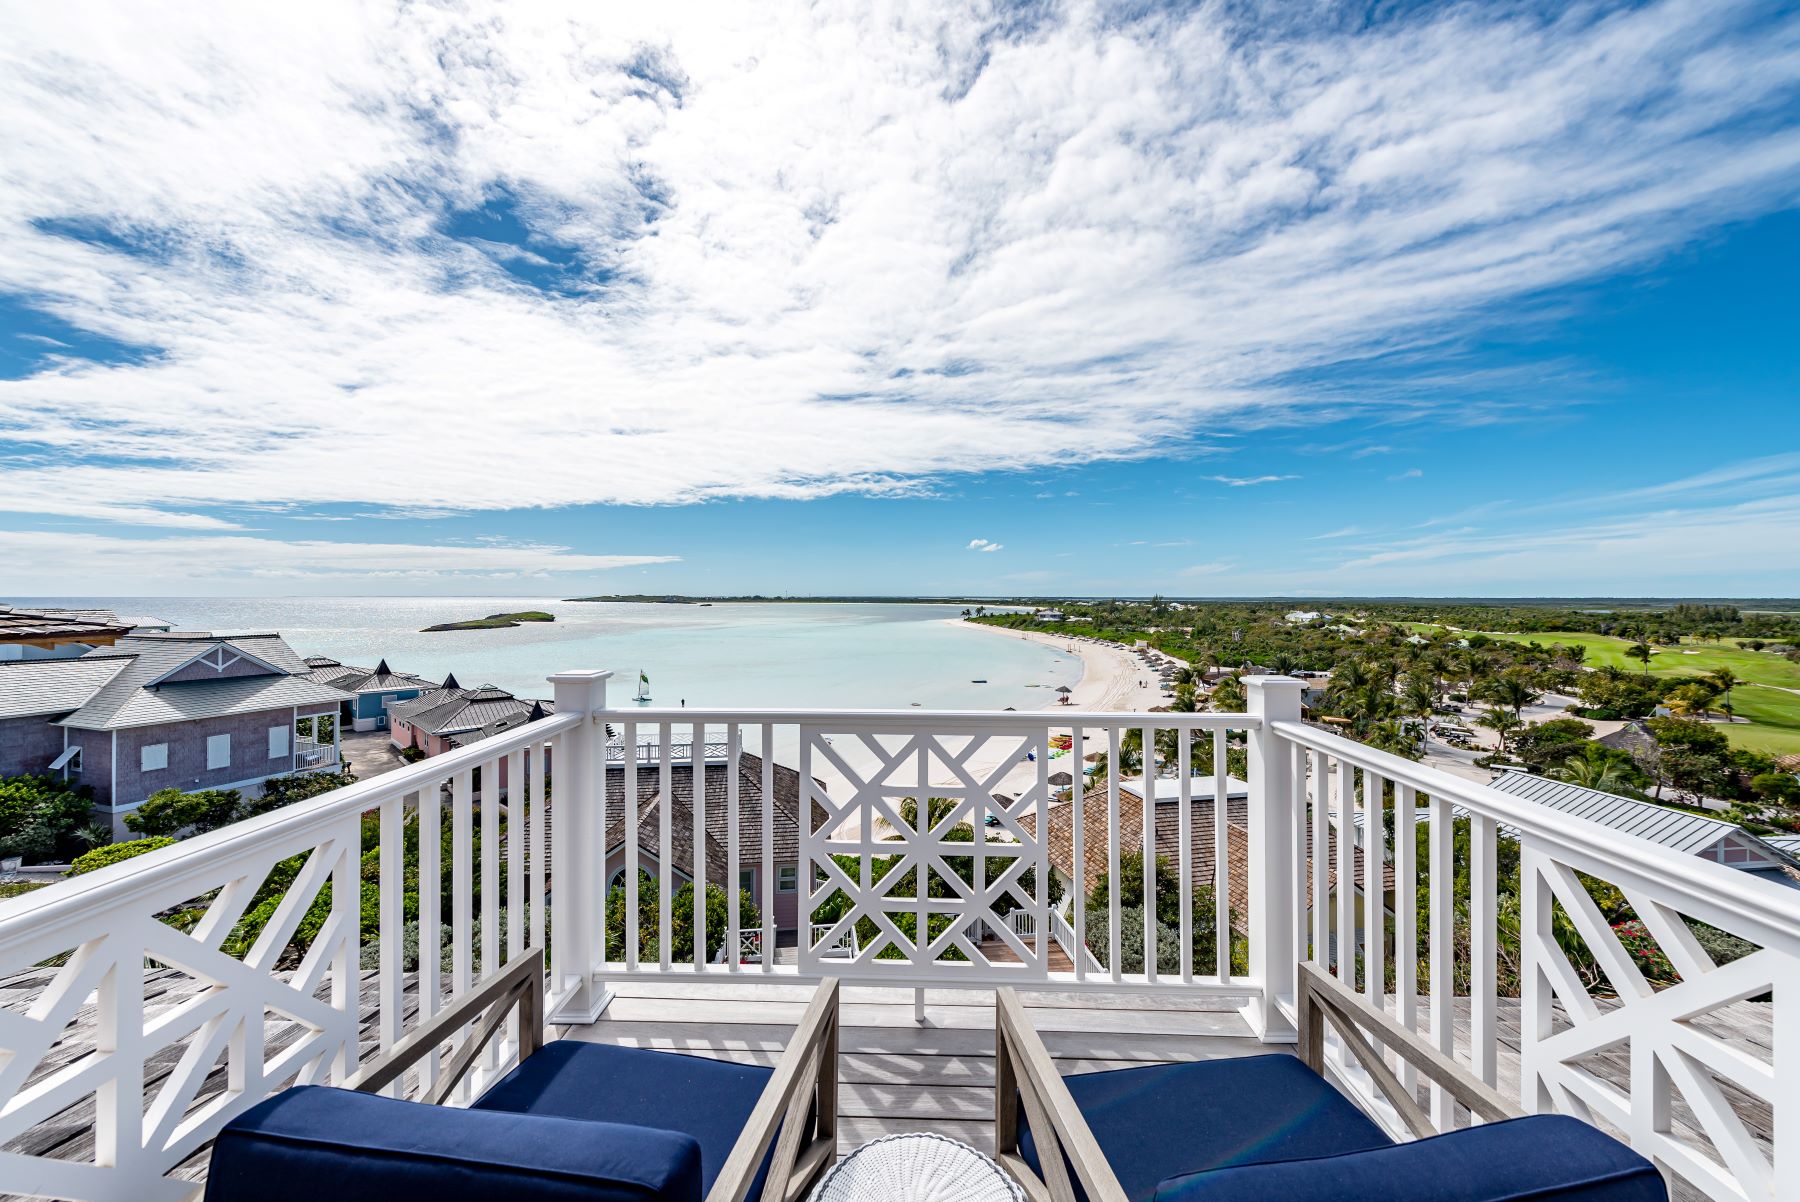 Balcony view of a beachfront villa located in The Bahamas at The Abaco Club